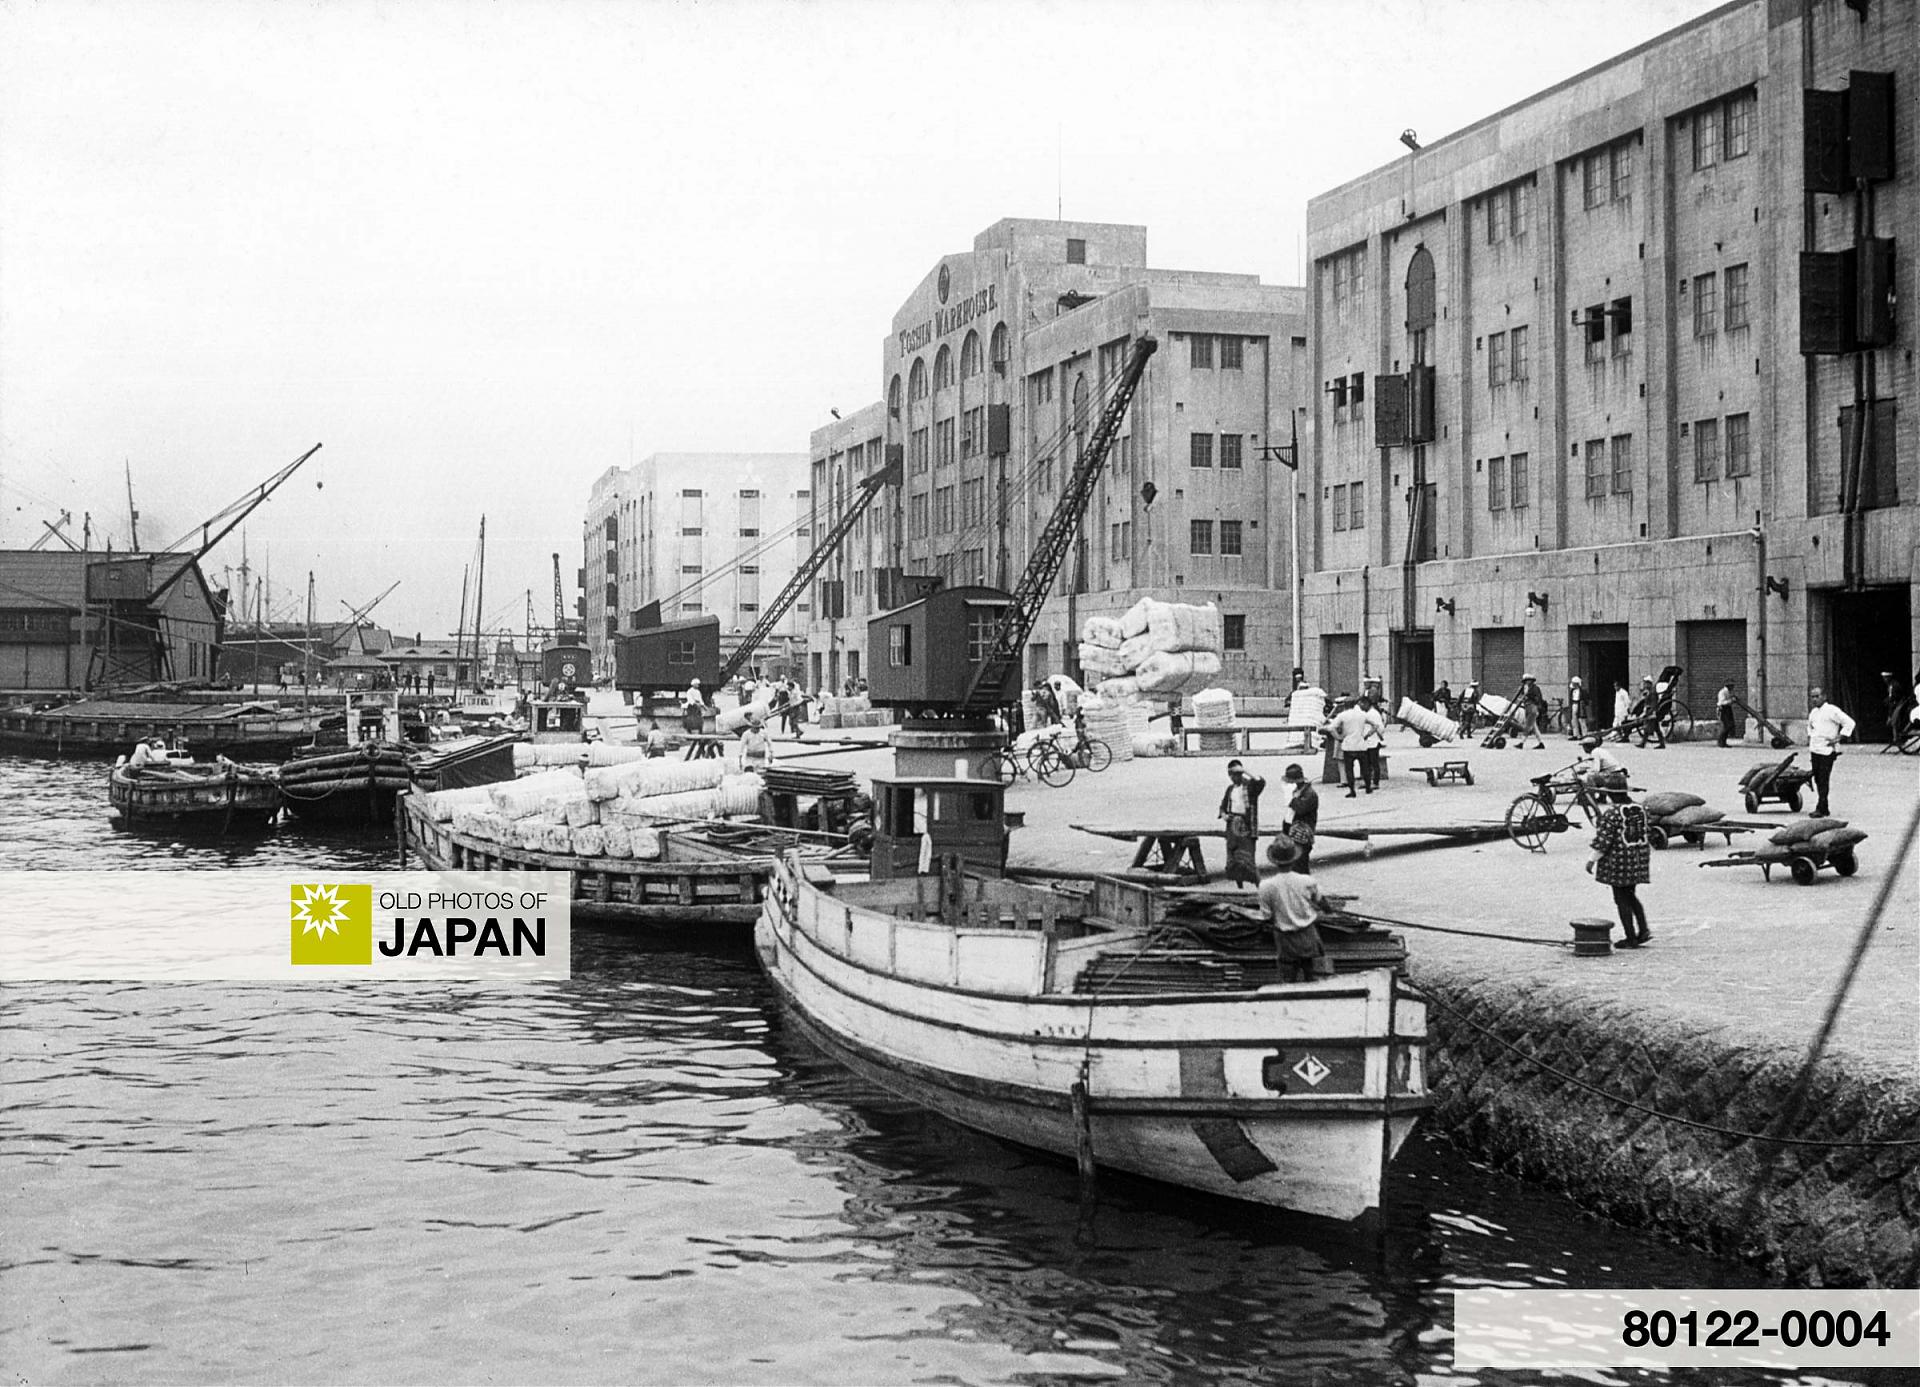 80122-0004 - Boats and Warehouses in Kobe Port, 1930